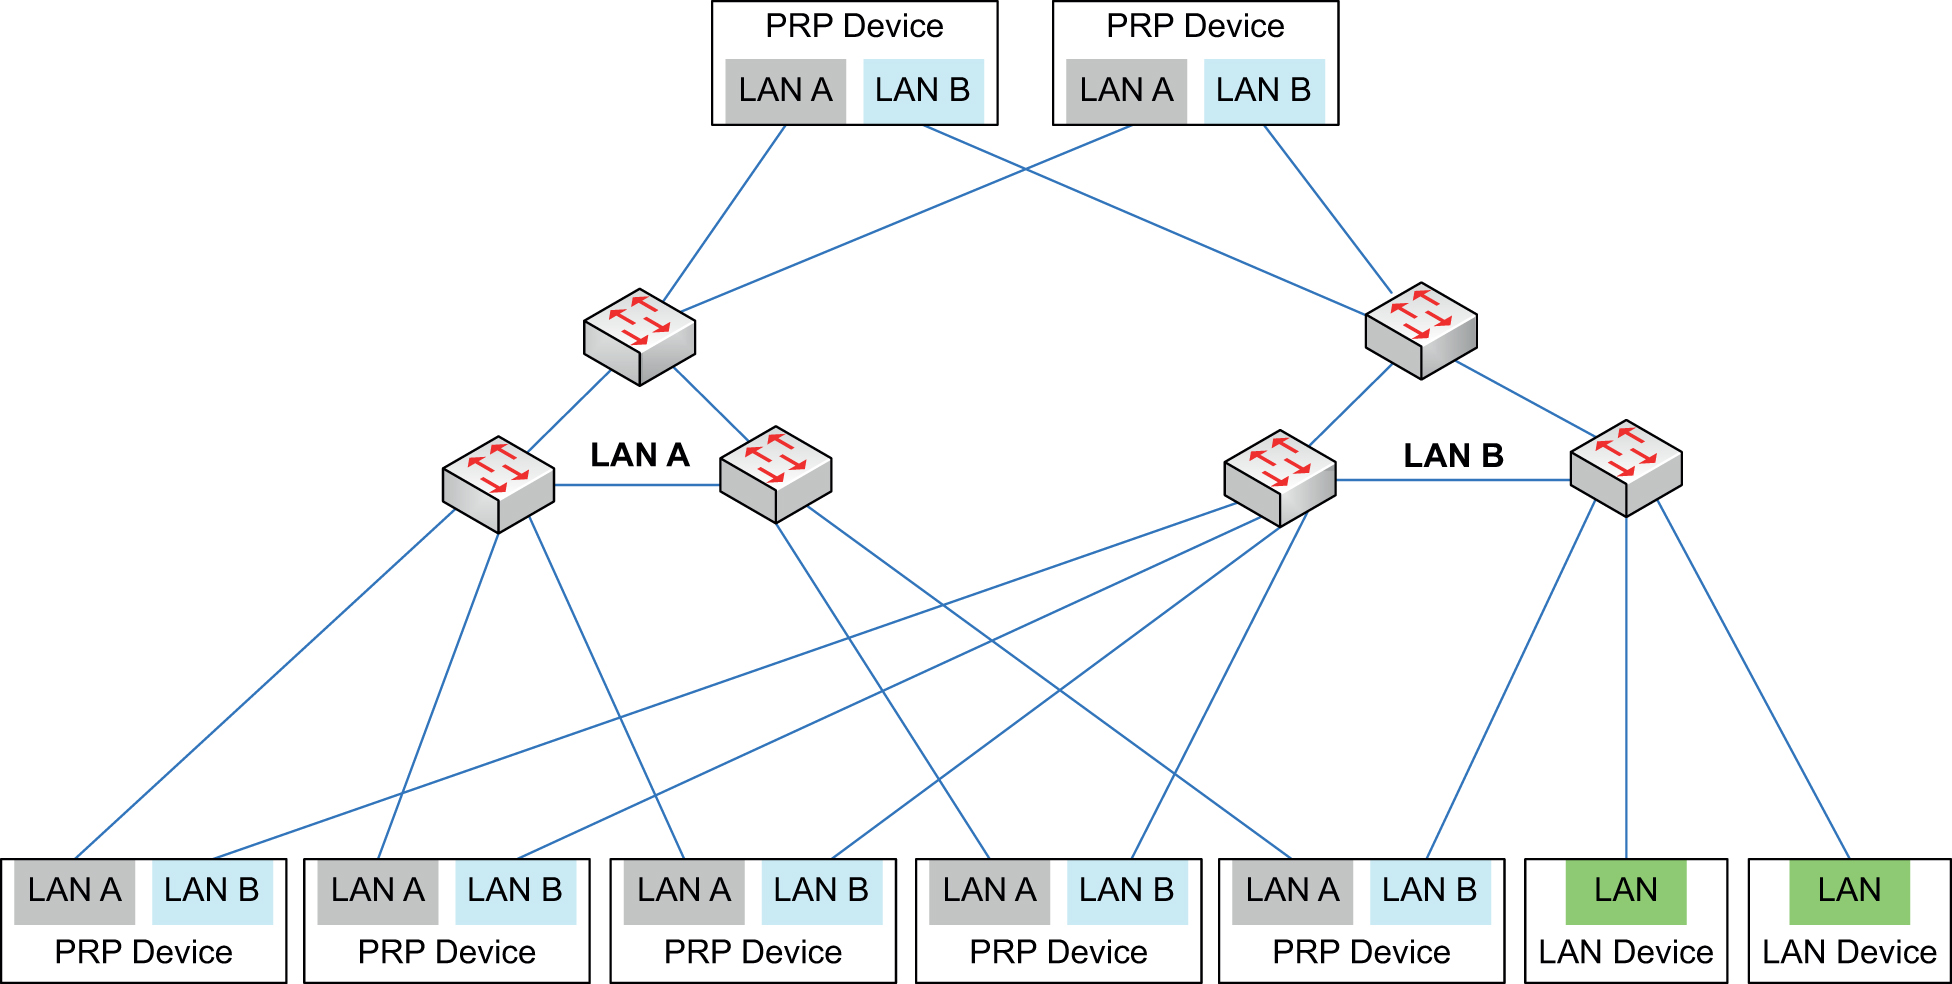 Figure 2: Overview of a Parallel Redundancy Protocol (PRP) network